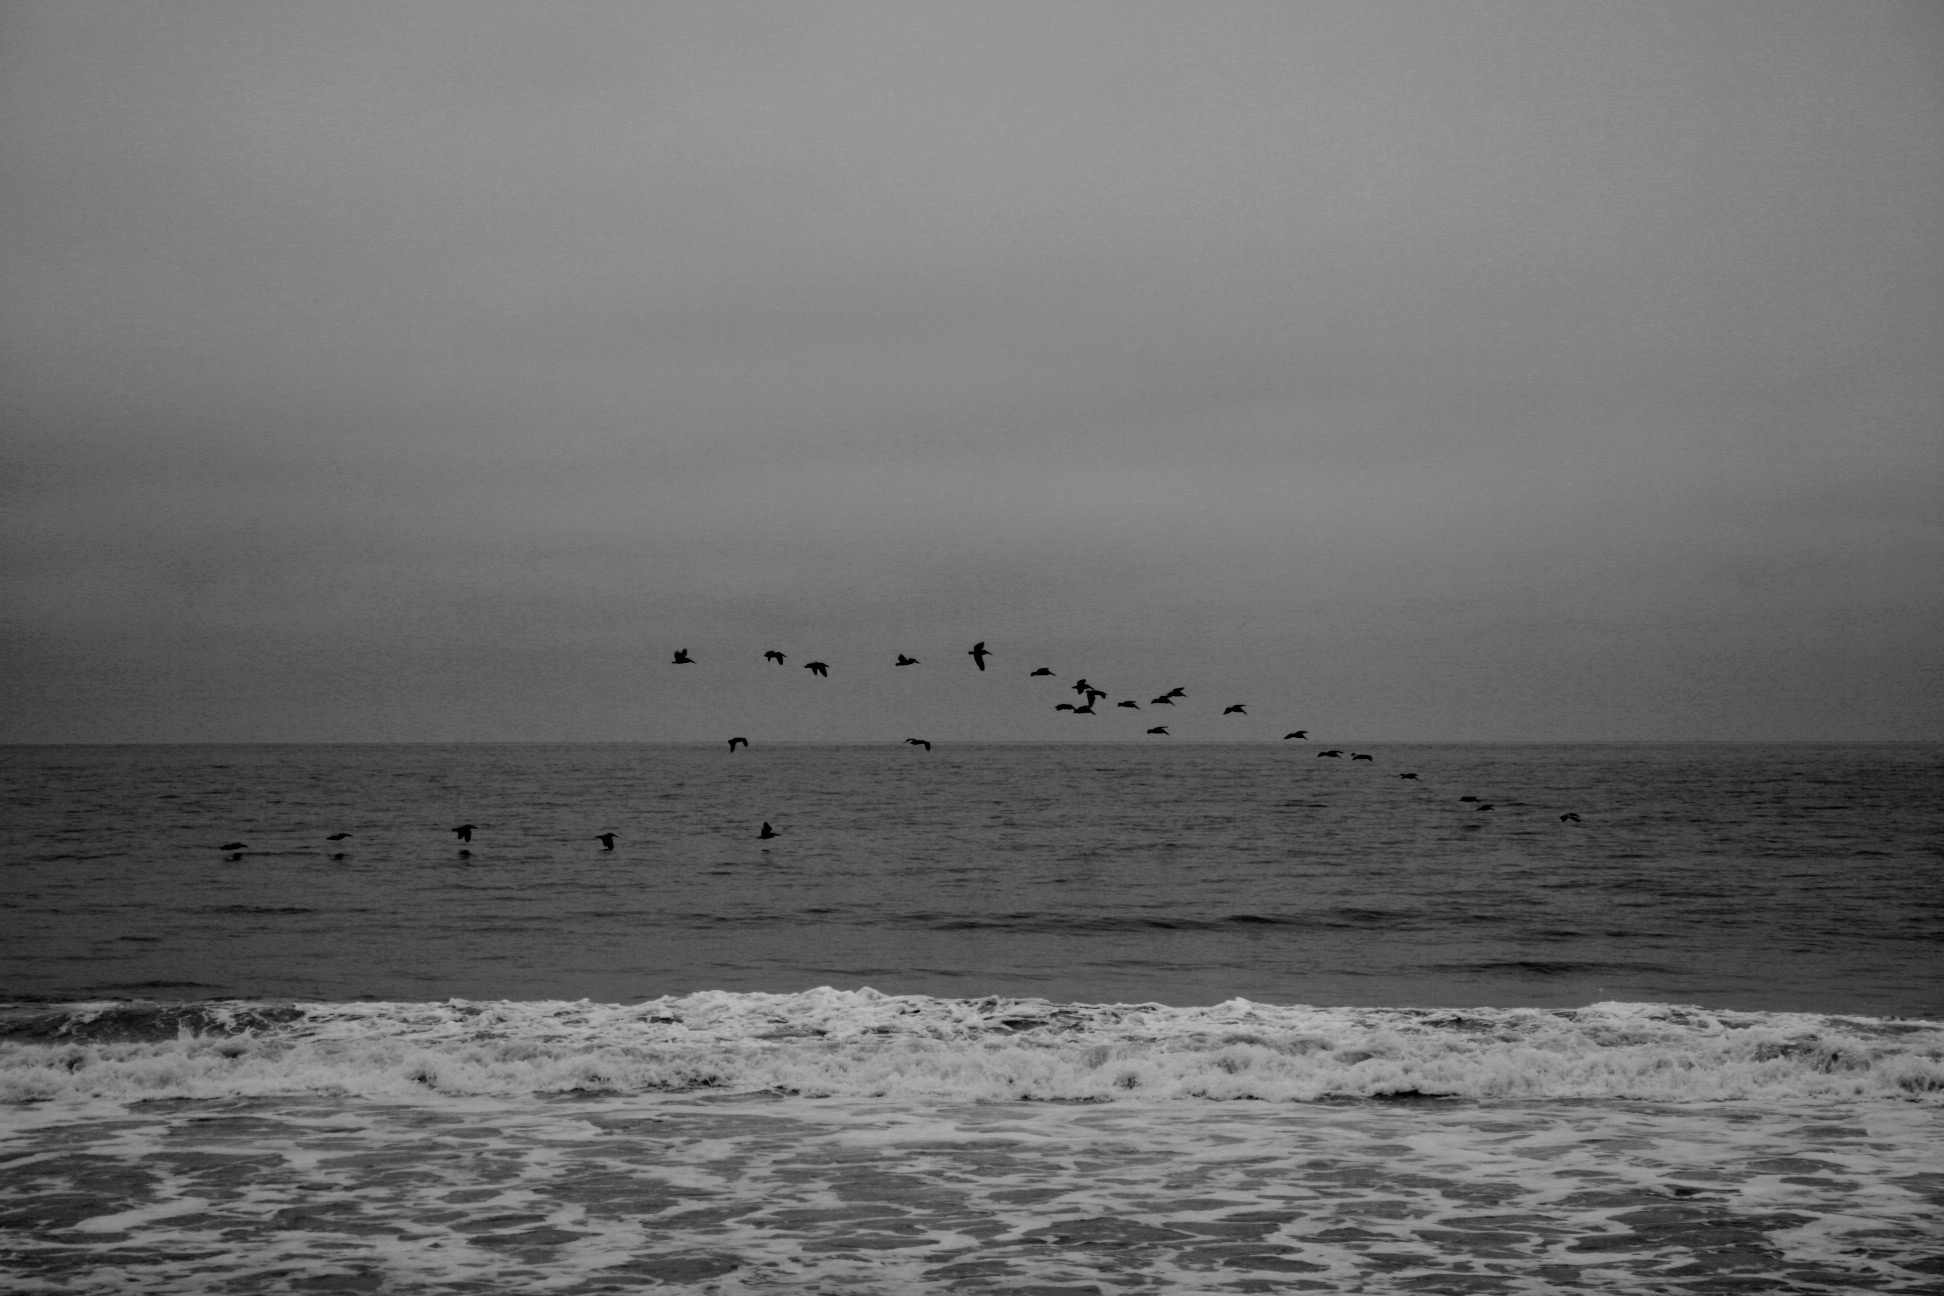 Brown Pelicans off the coast of Point Dume in Southern California, July 2013.